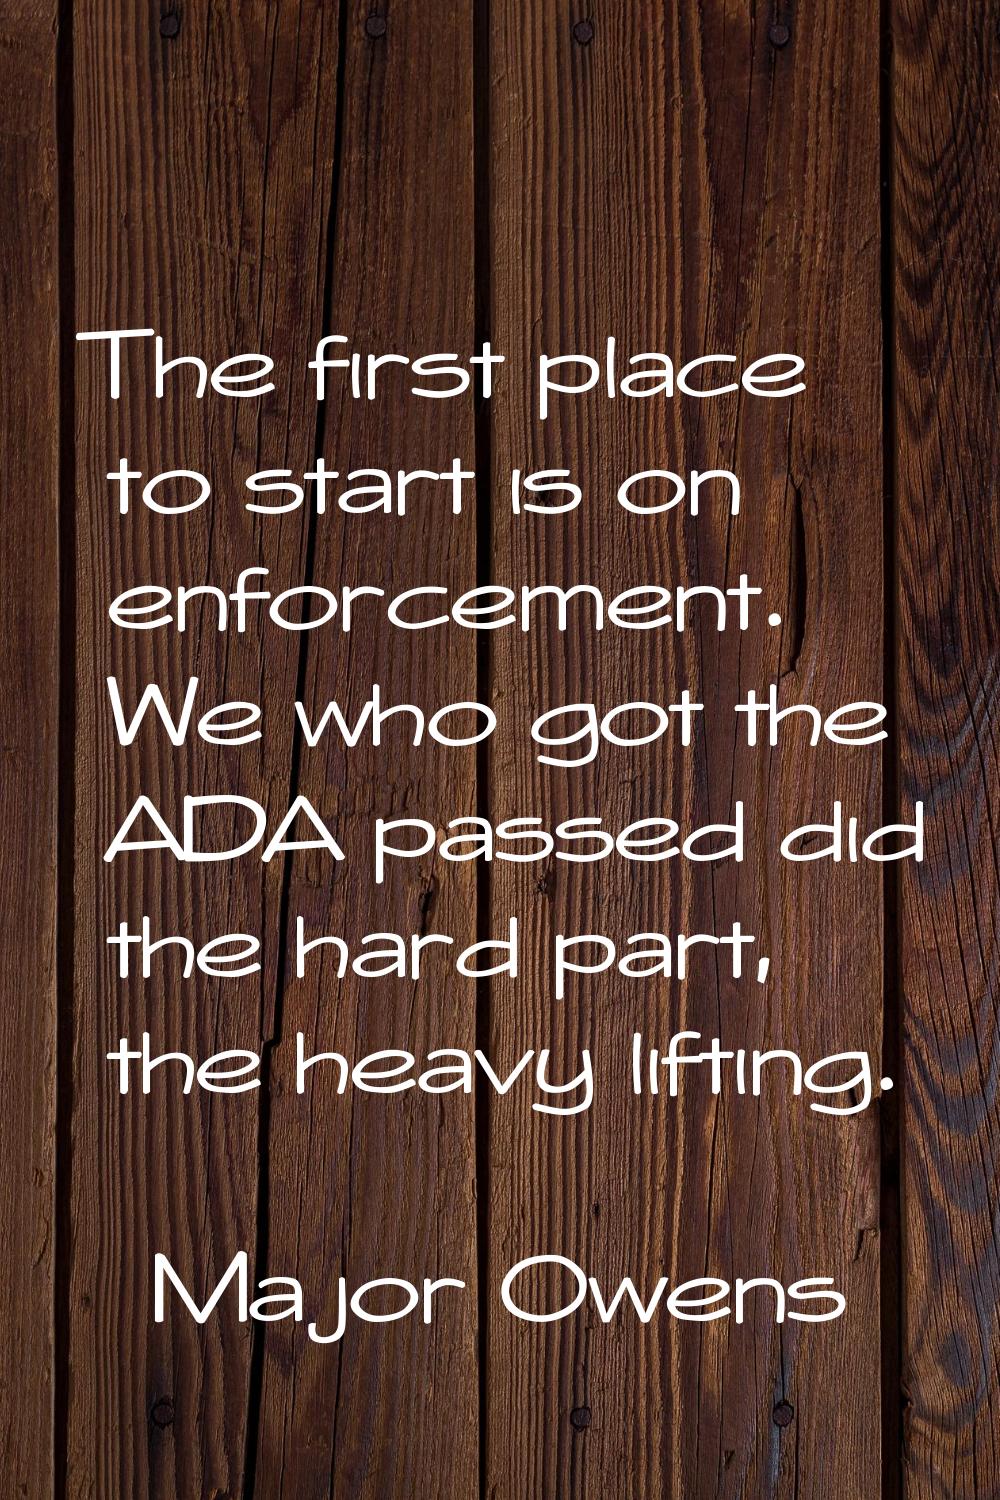 The first place to start is on enforcement. We who got the ADA passed did the hard part, the heavy 